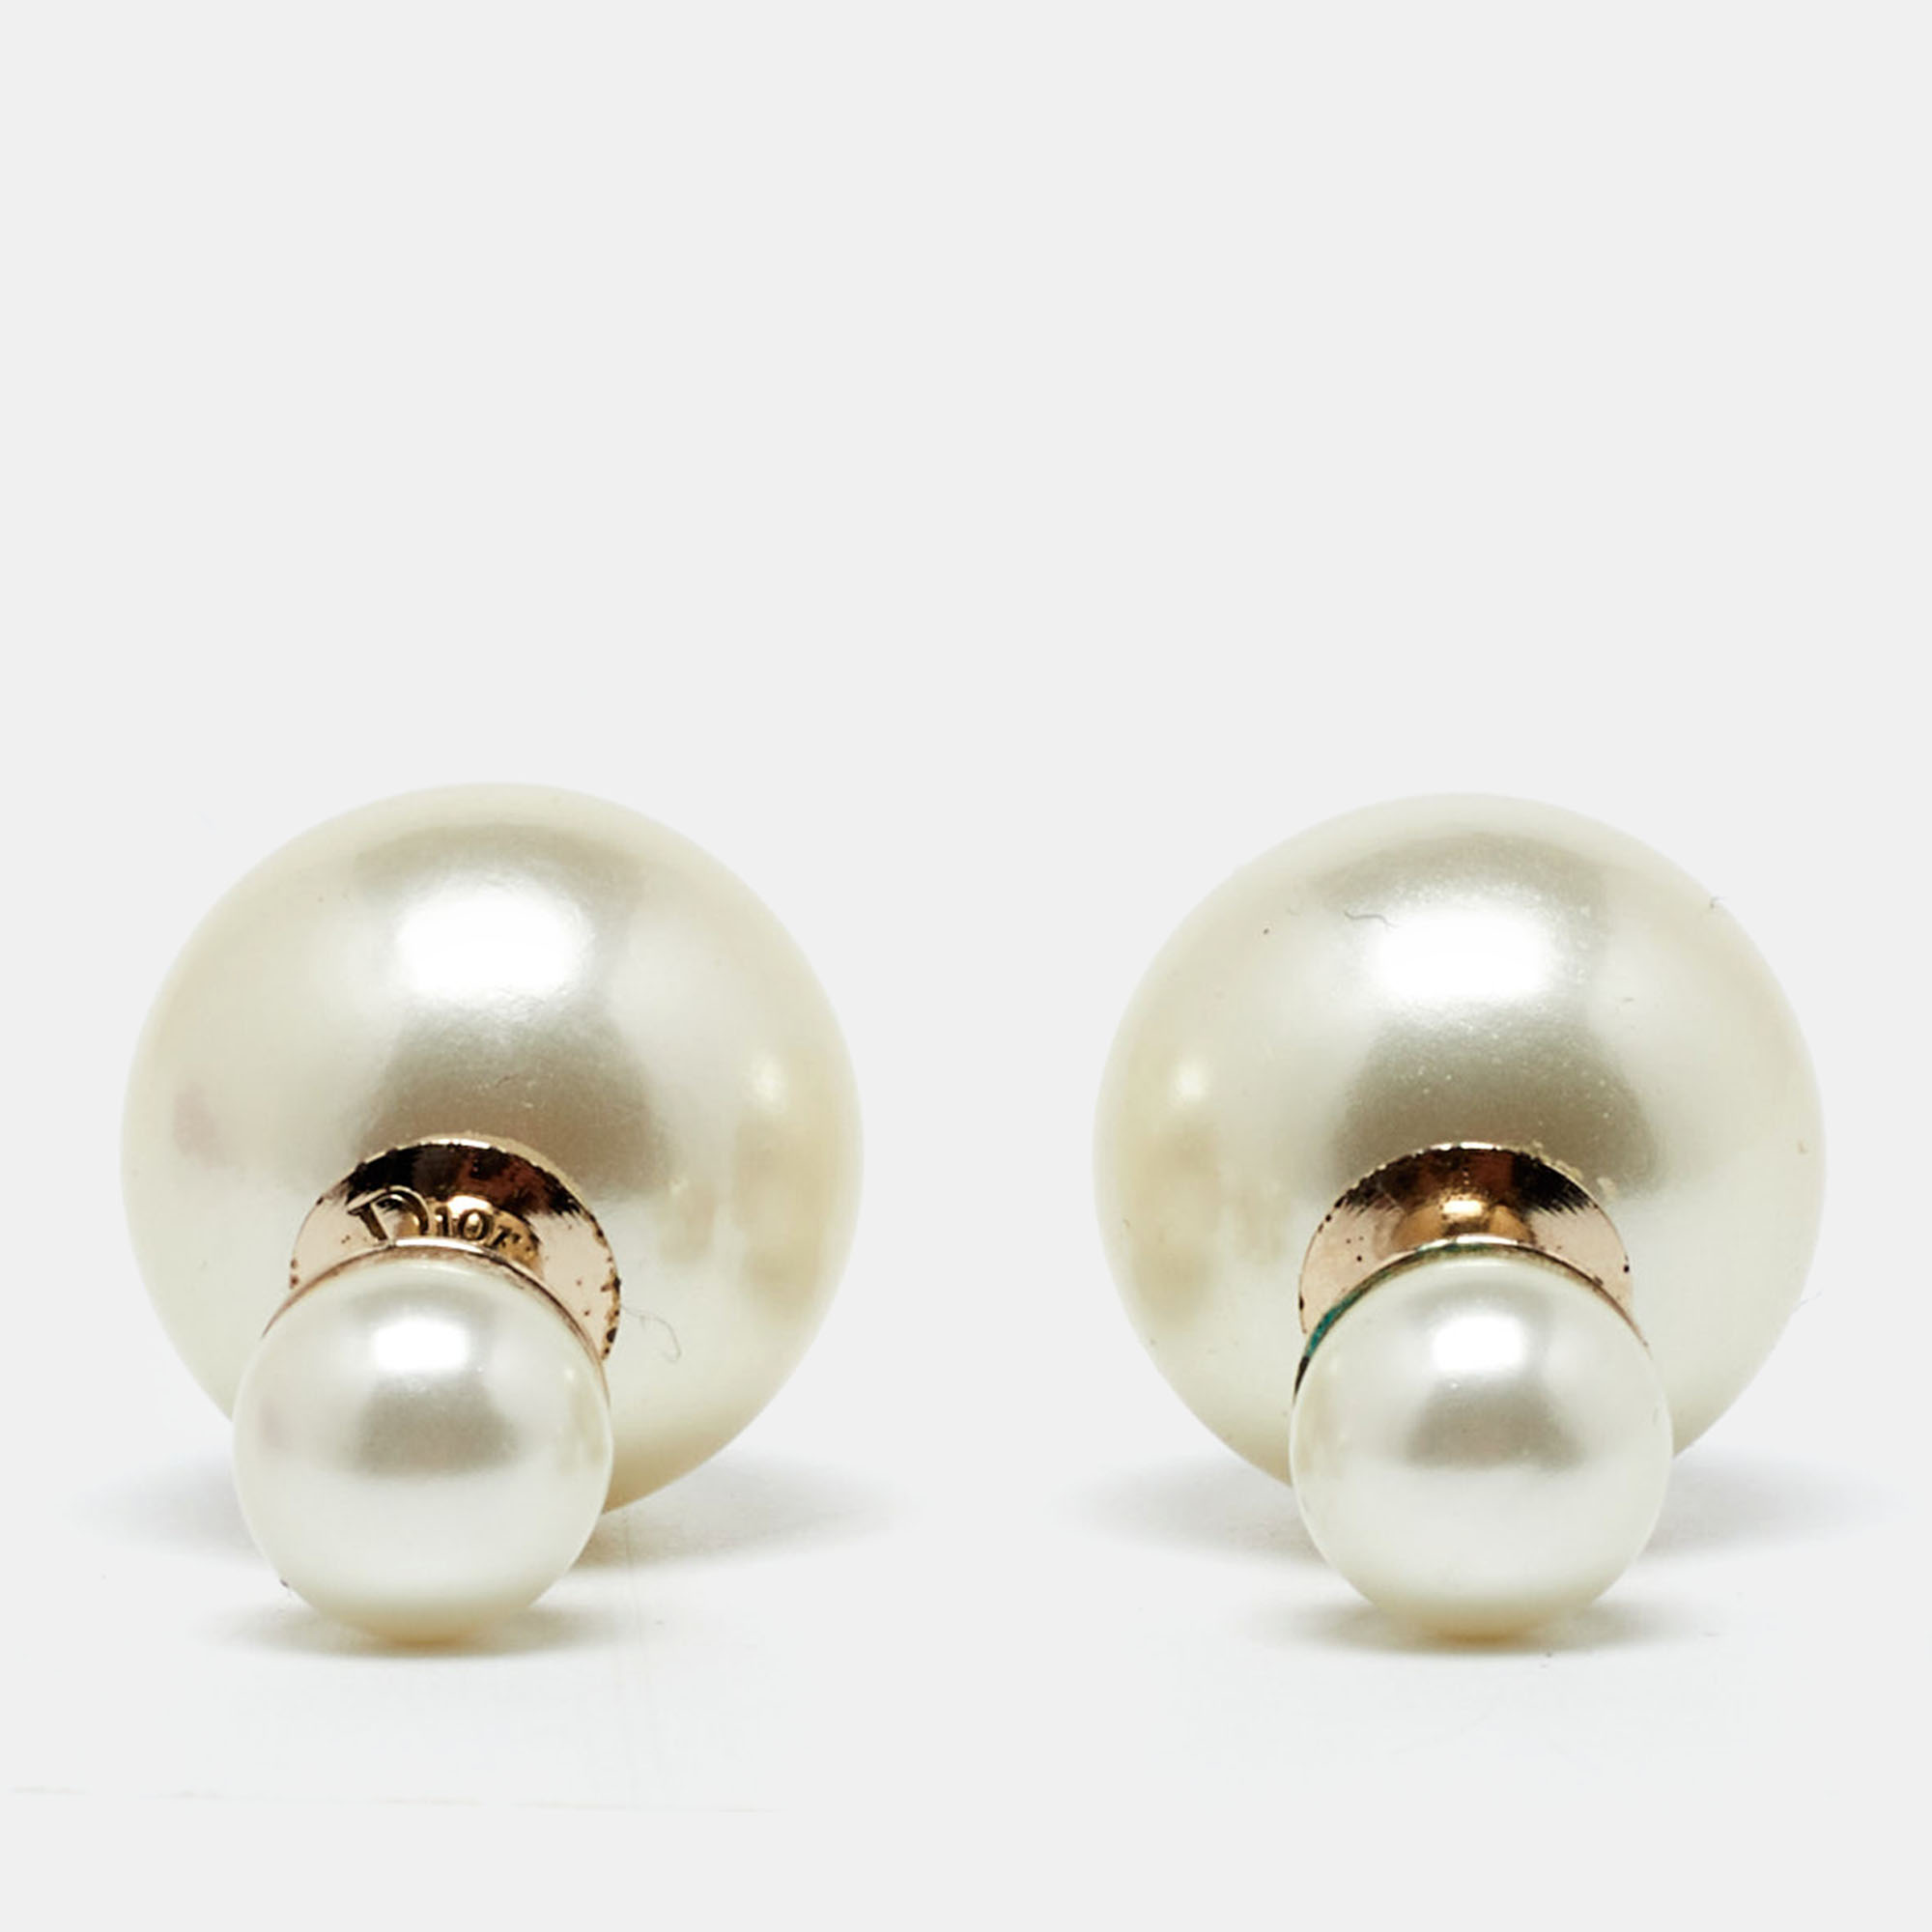 Dior tribales faux pearl gold tone earrings